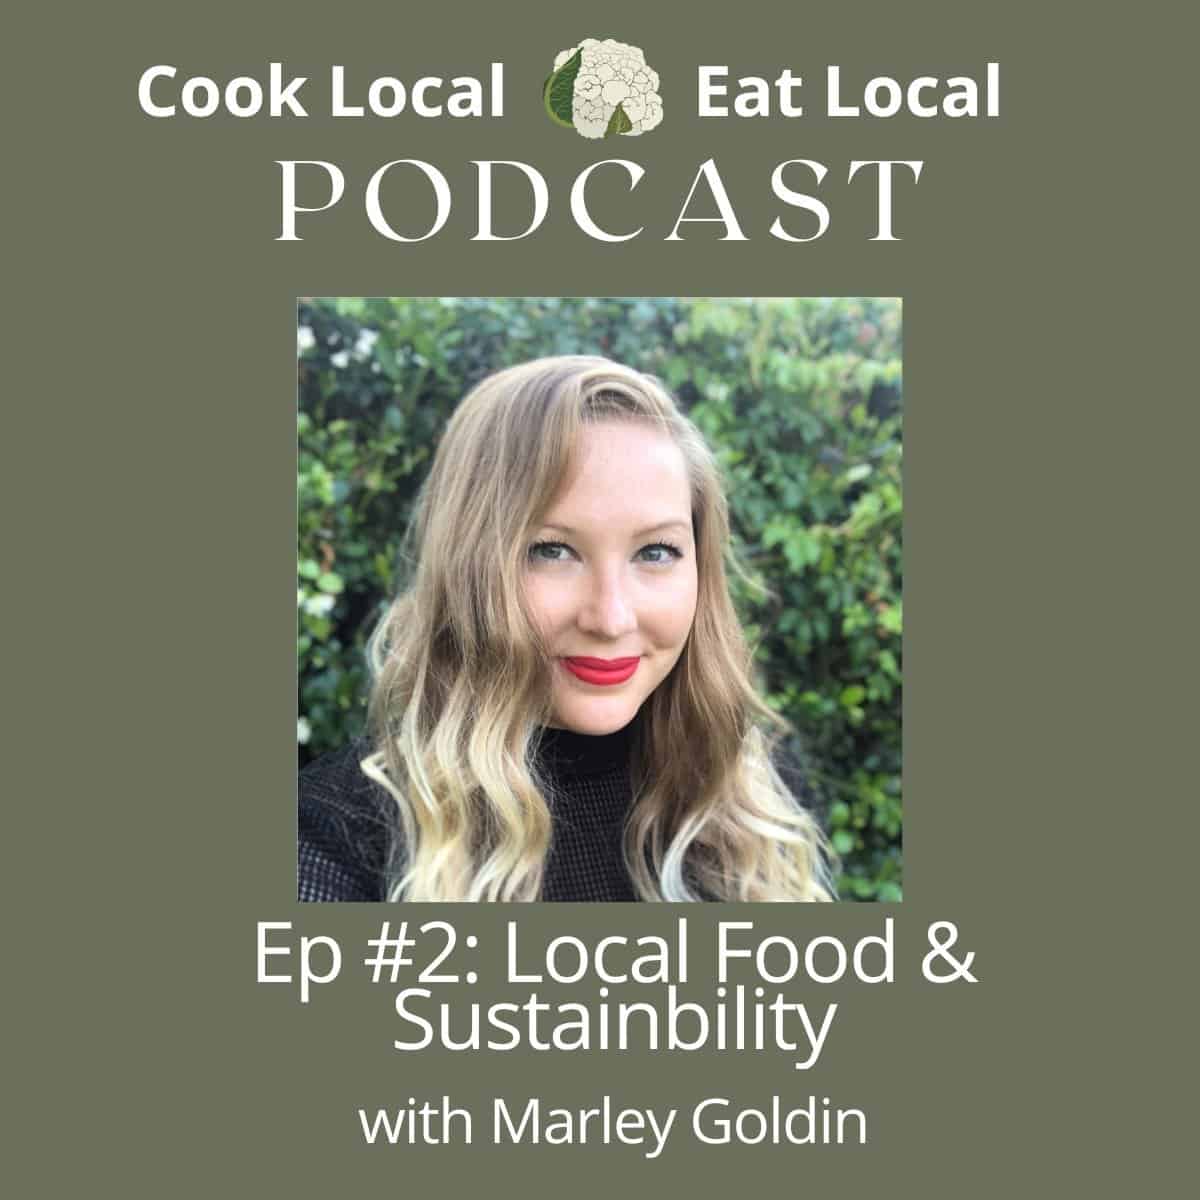 Cook Local Eat Local Podcast announcement, with photo of guest Marley Goldin, and accompanying text about the show's focus on sustainability and local food.